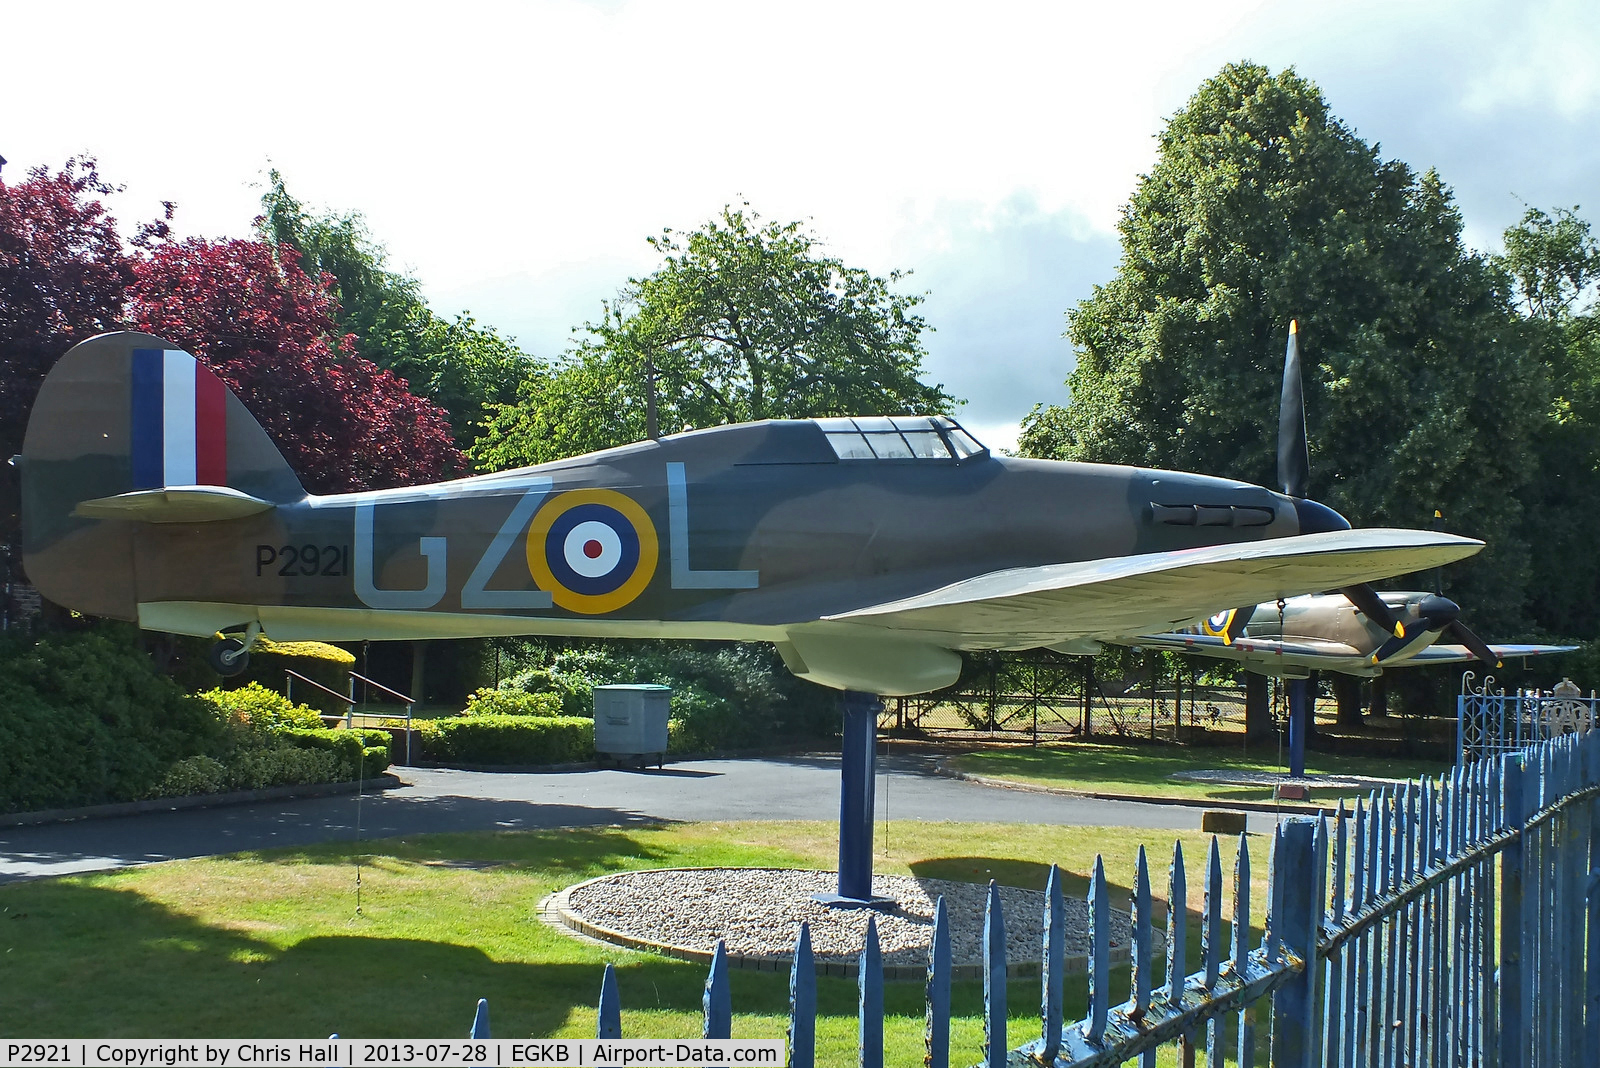 P2921, 2010 Hawker Hurricane 1 Replica C/N Not found P2921, Painted to represent 32 Sqn Hurricane flown by Fl. Lt. P.M. Brothers who was credited with destroying 8 German aircraft during the Battle of Britain